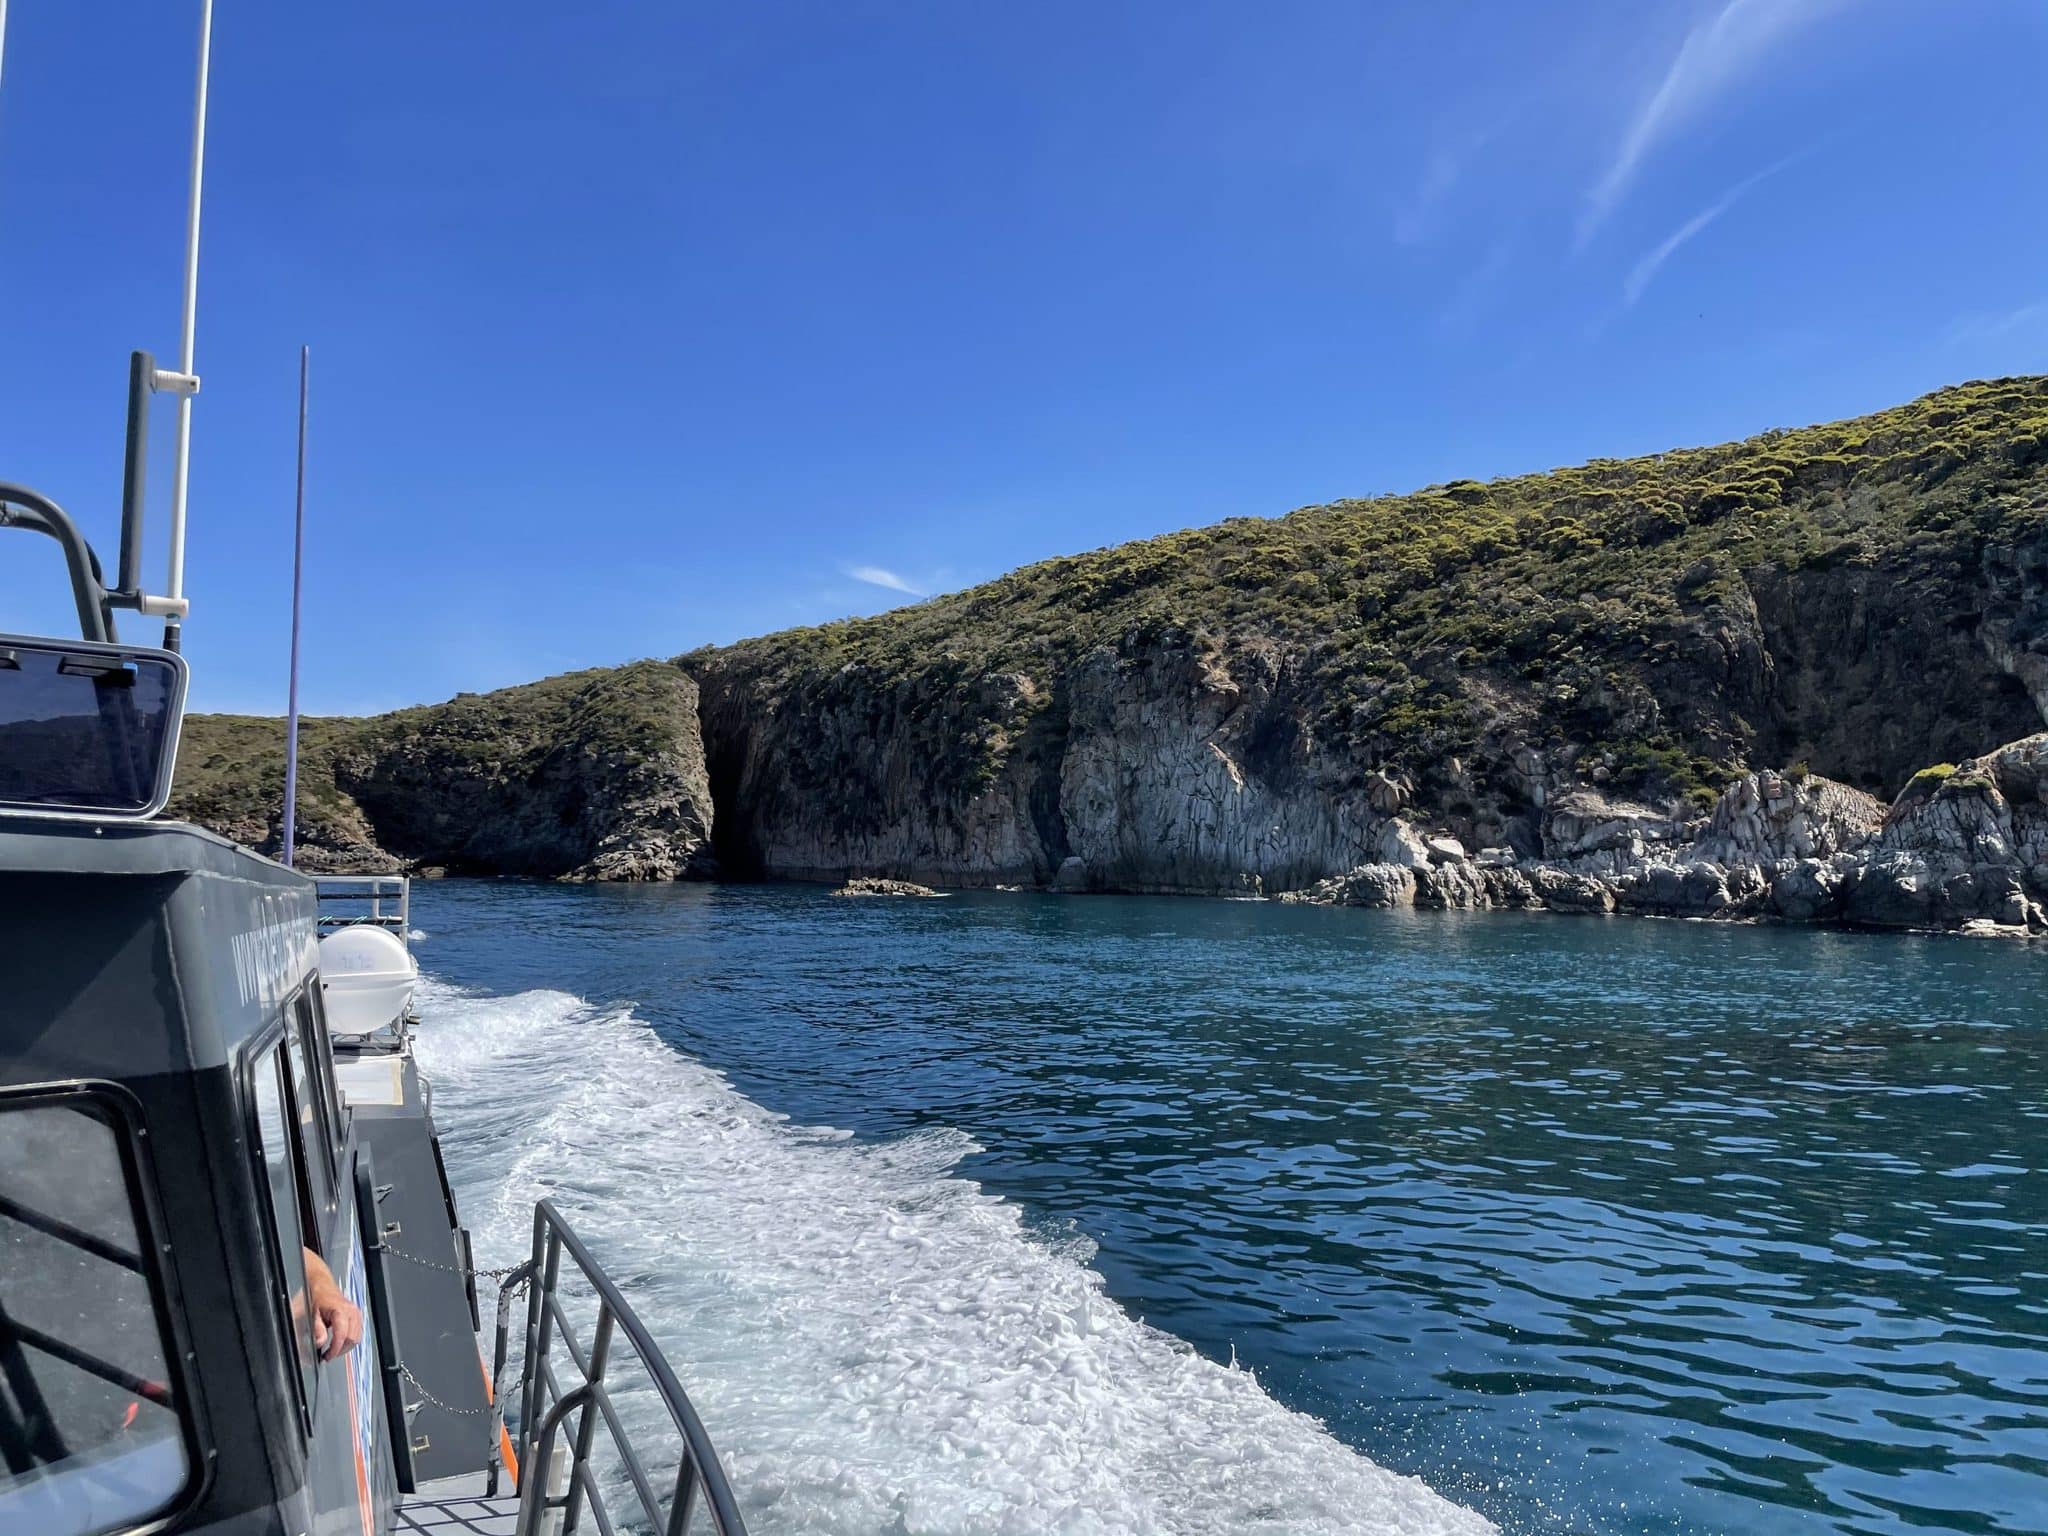 Lincoln National Park coastline from a boat